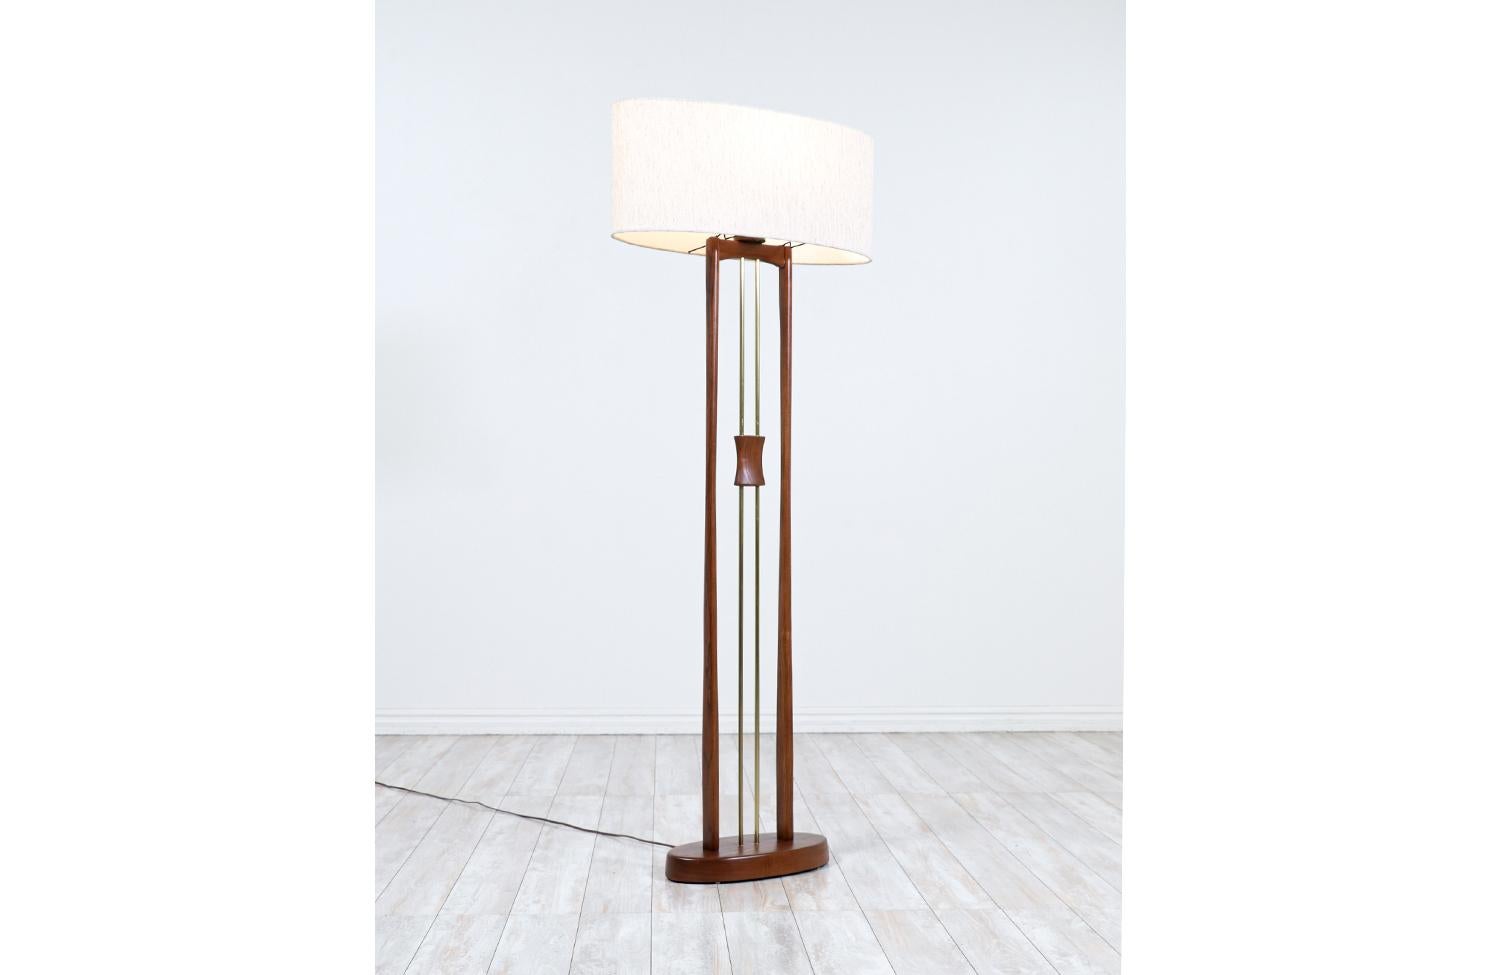 Dimensions:

59in H x 14.50in W x 7.50in D

Lamp Shade: 10in H x 24in W x 9in D

________________________________________

Transforming a piece of Mid-Century Modern furniture is like bringing history back to life, and we take this journey with